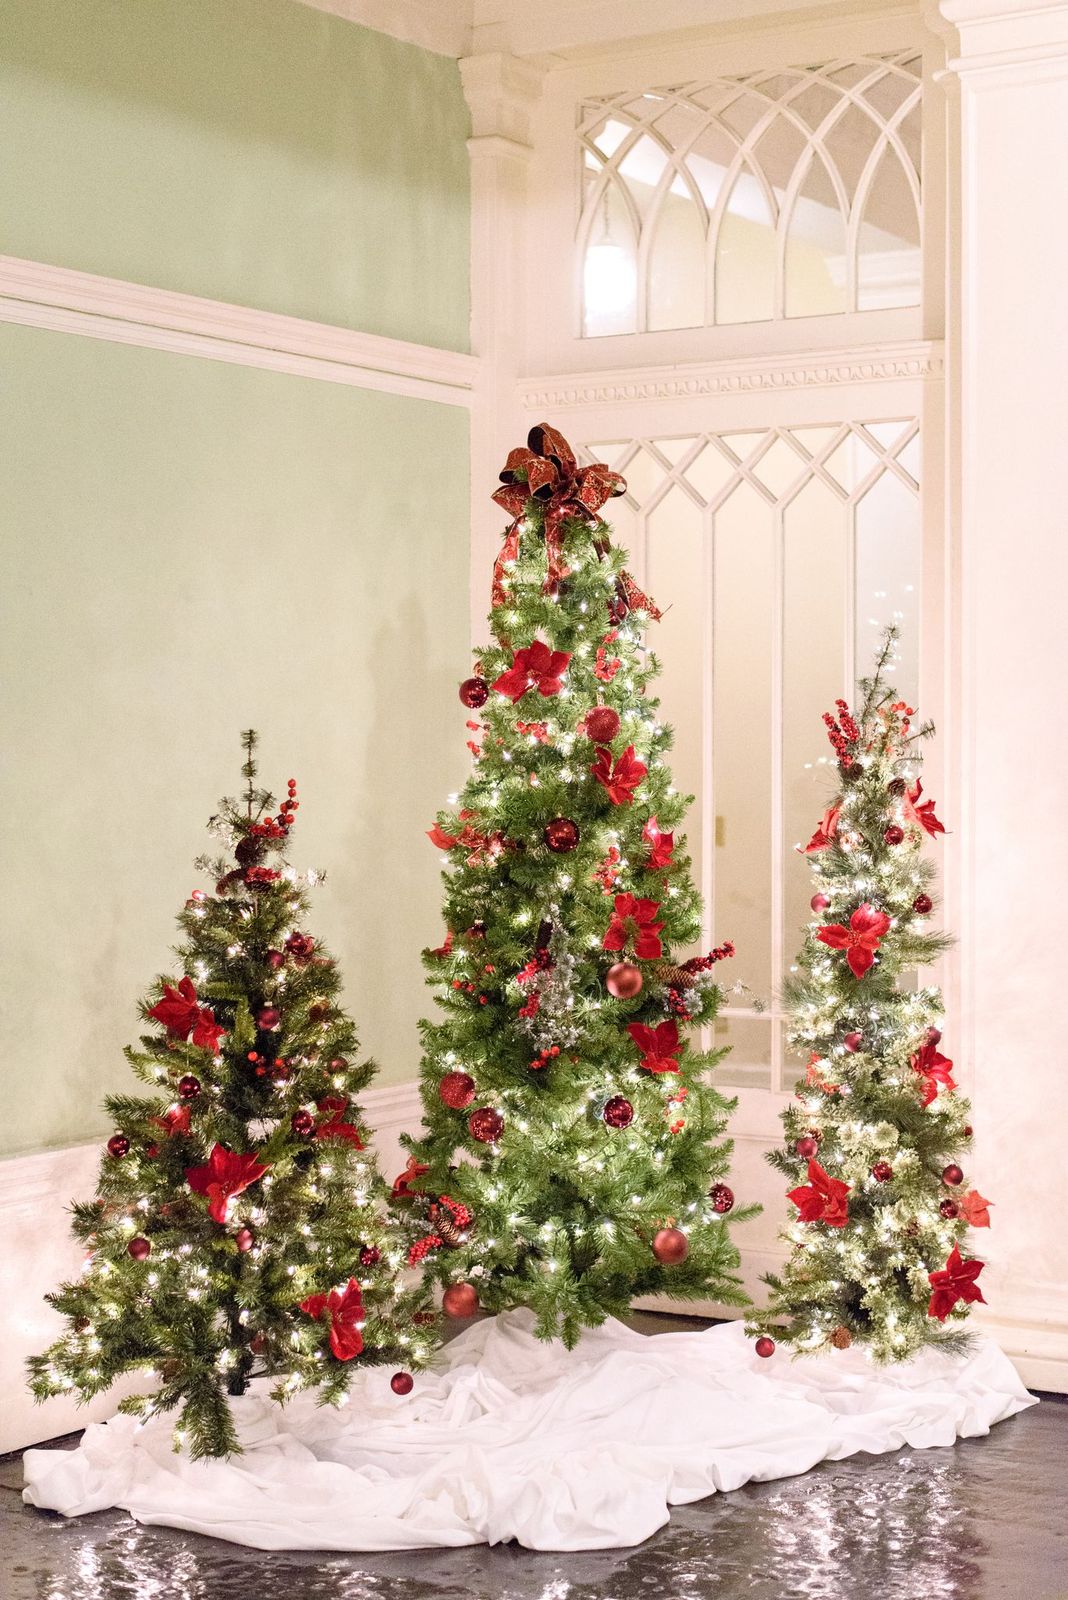 Christmas trees decorated with red ornaments for winter wedding